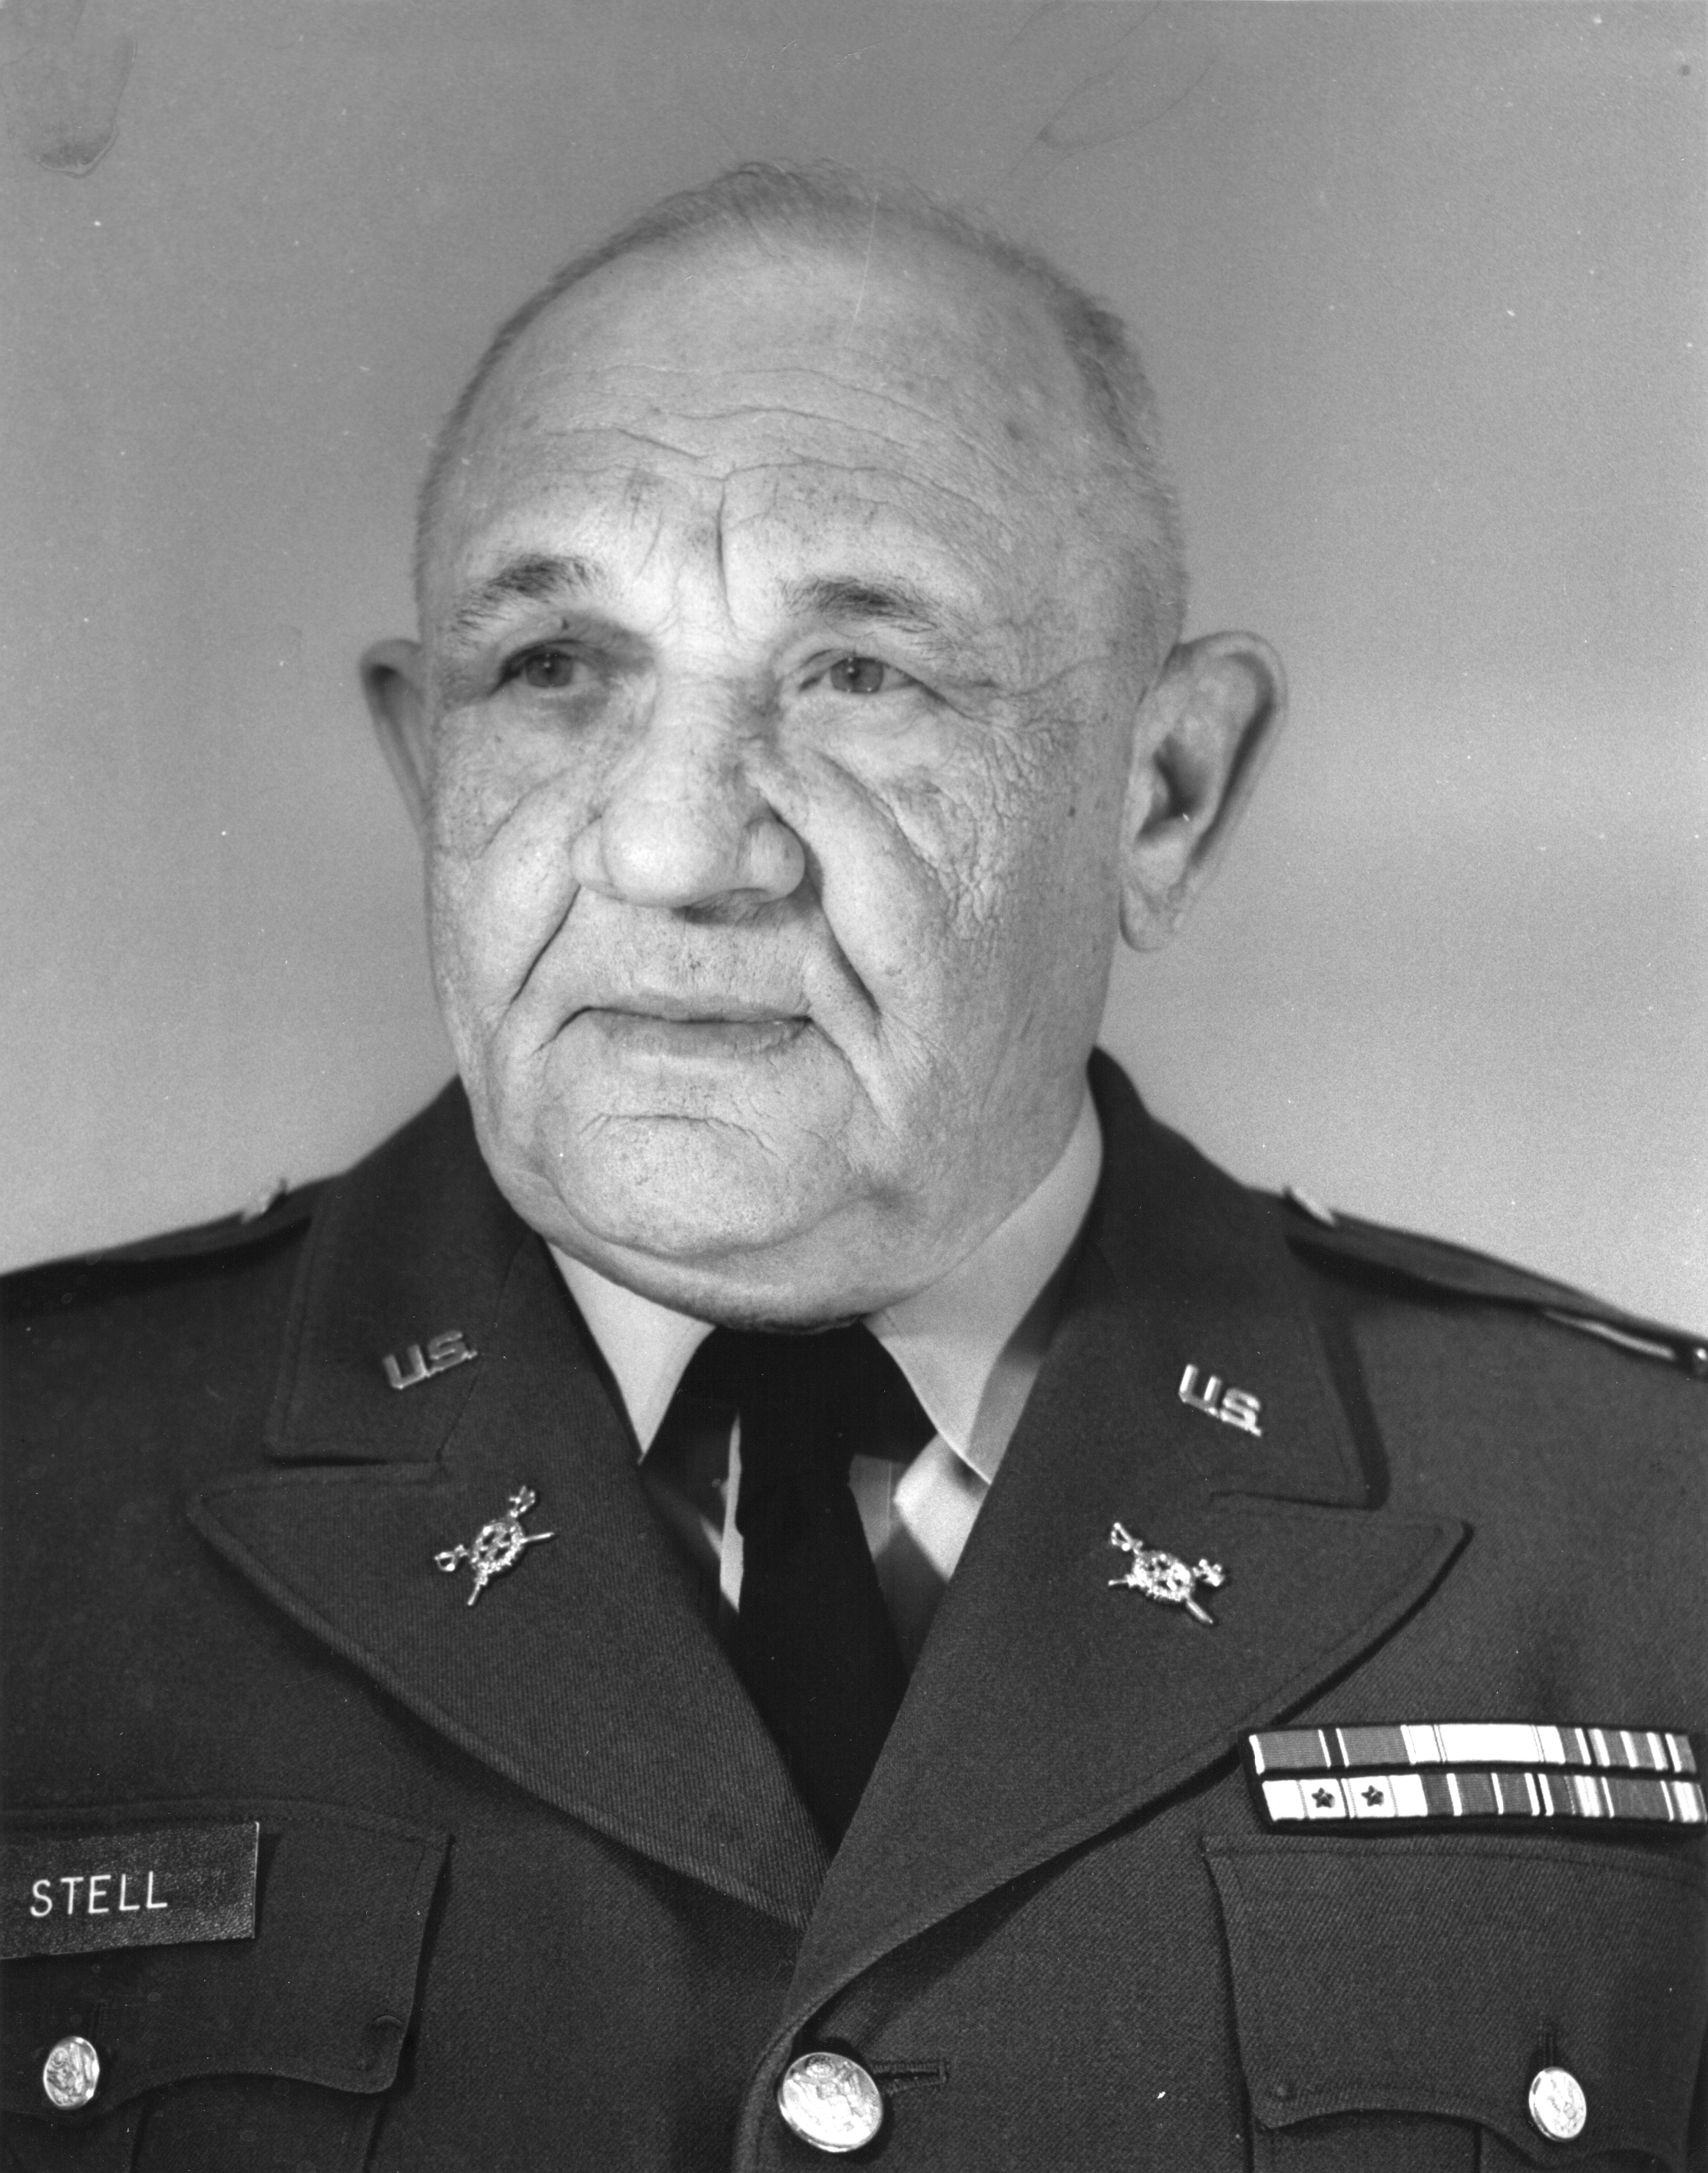 Colonel James Stell Sr.